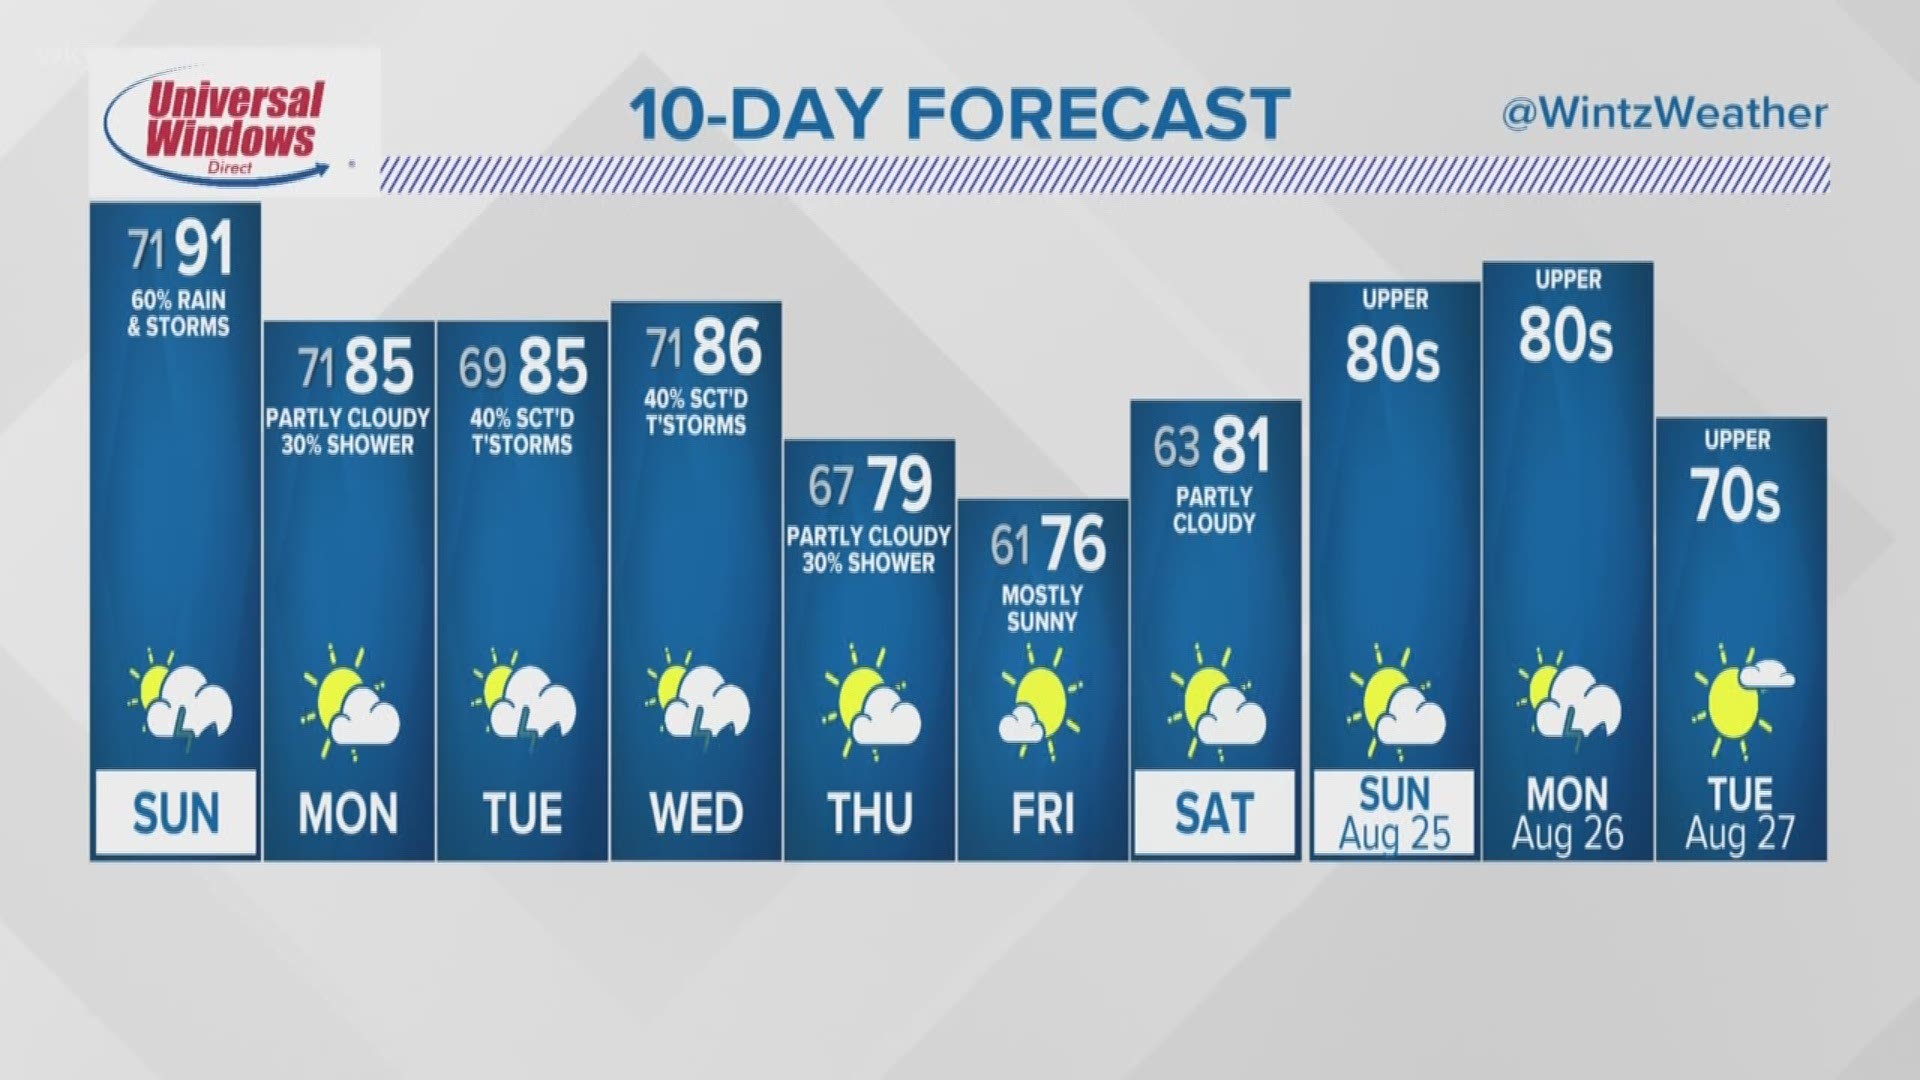 The heat and humidity will stick around through the middle of next week